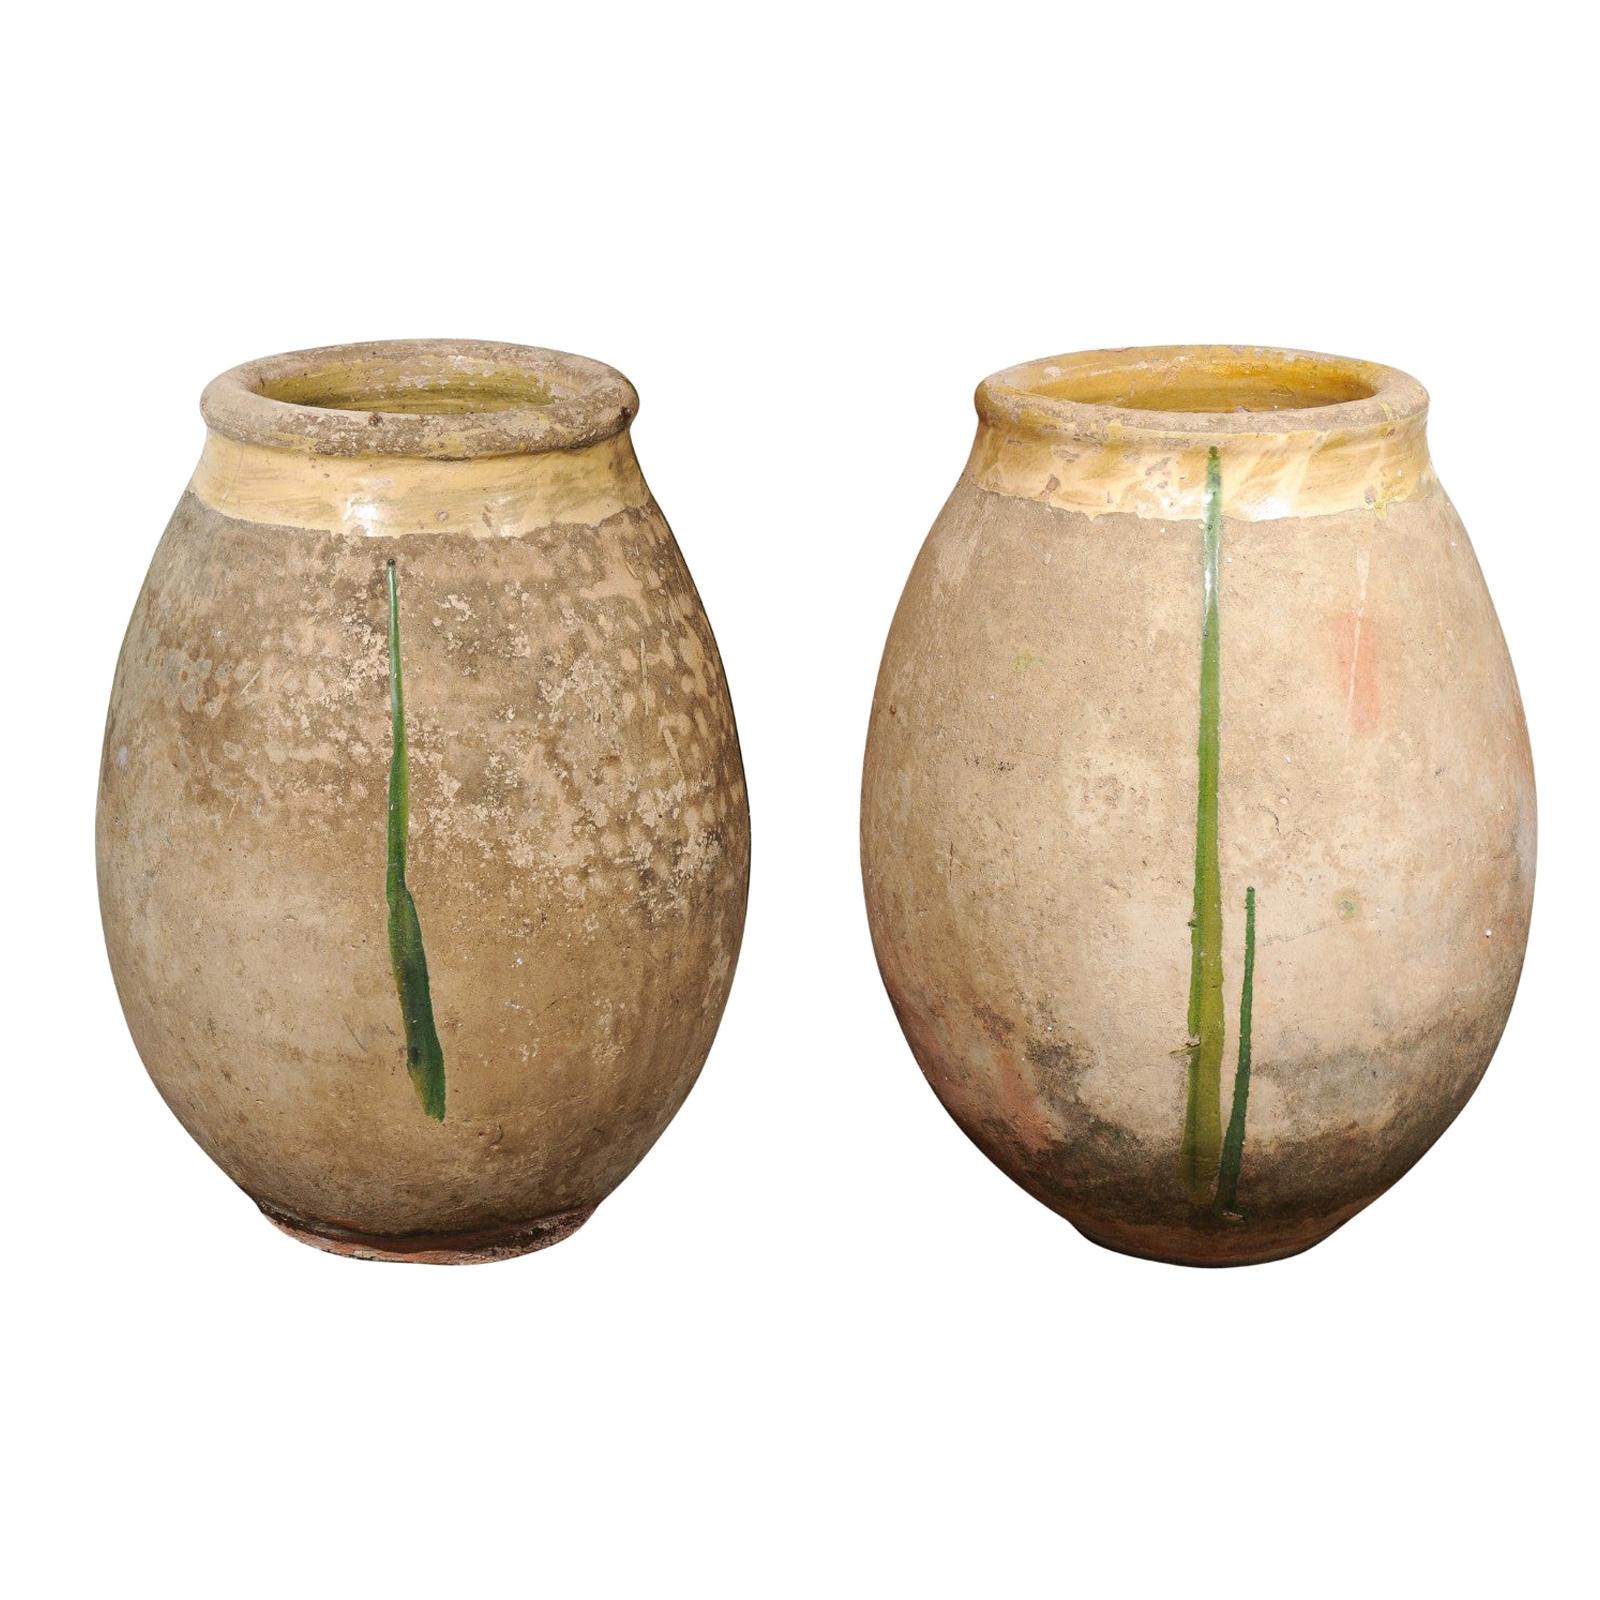 French Provincial 19th Century Terracotta Biot Jar with Yellow and Green Glaze